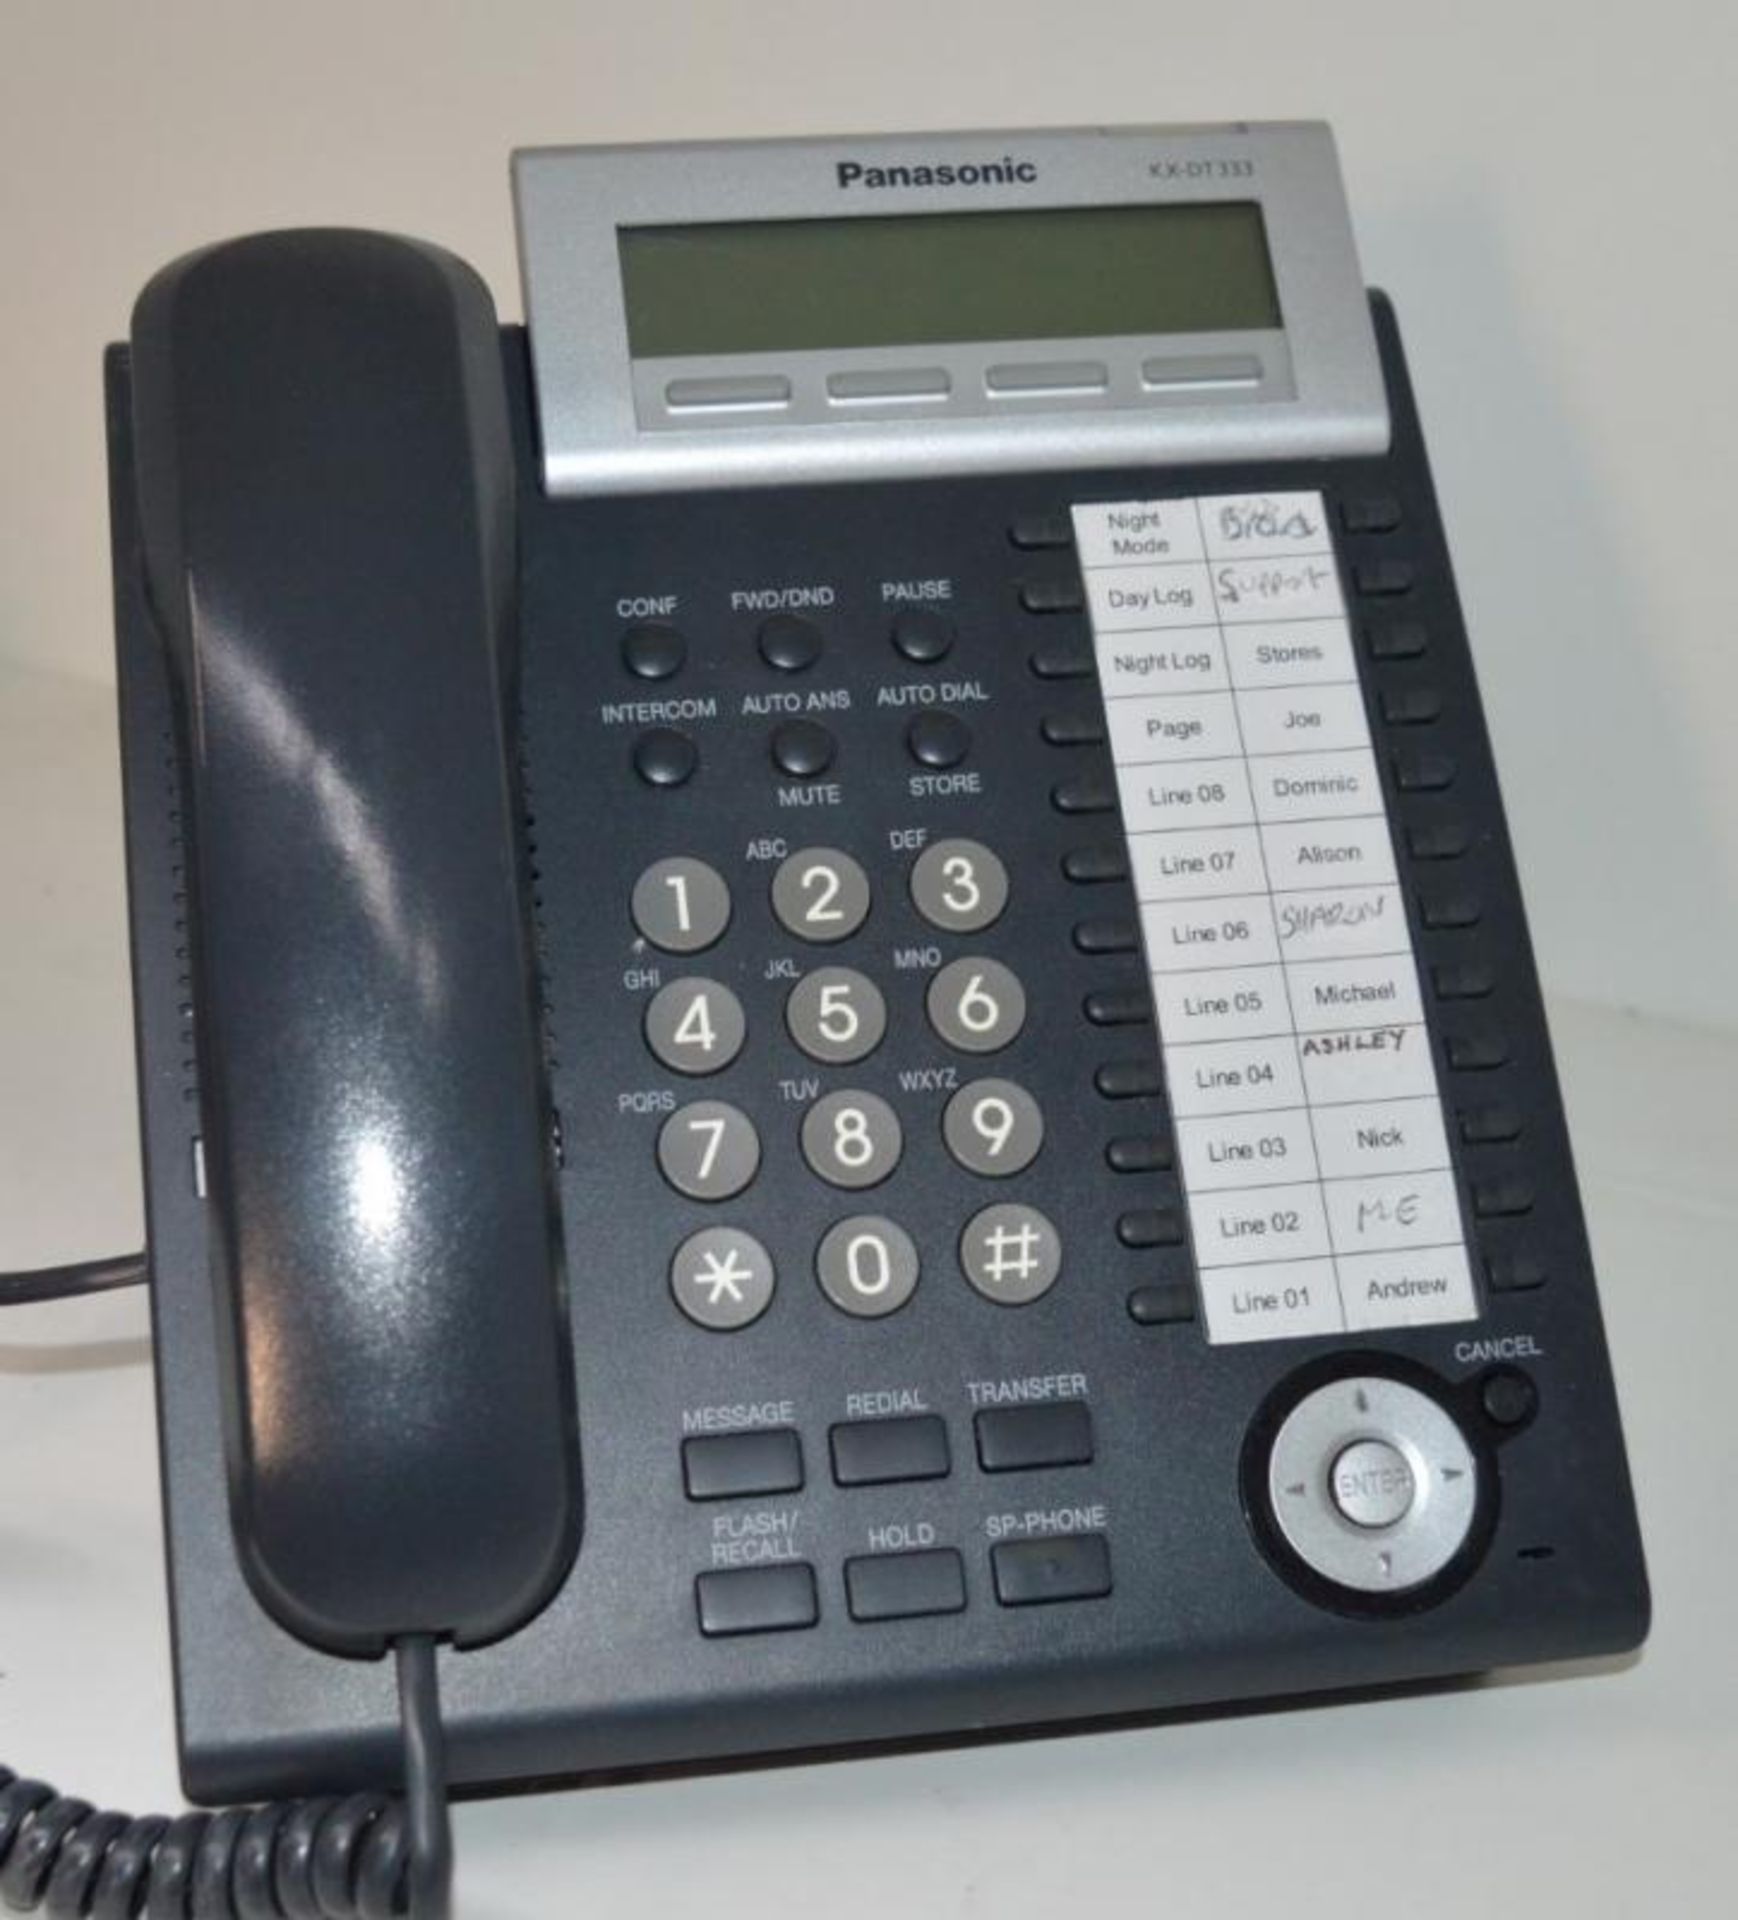 4 x Panasonic KX-DT333 Telephone Handsets - Removed From Office Environment - CL011 - Ref B1 - Locat - Image 2 of 2